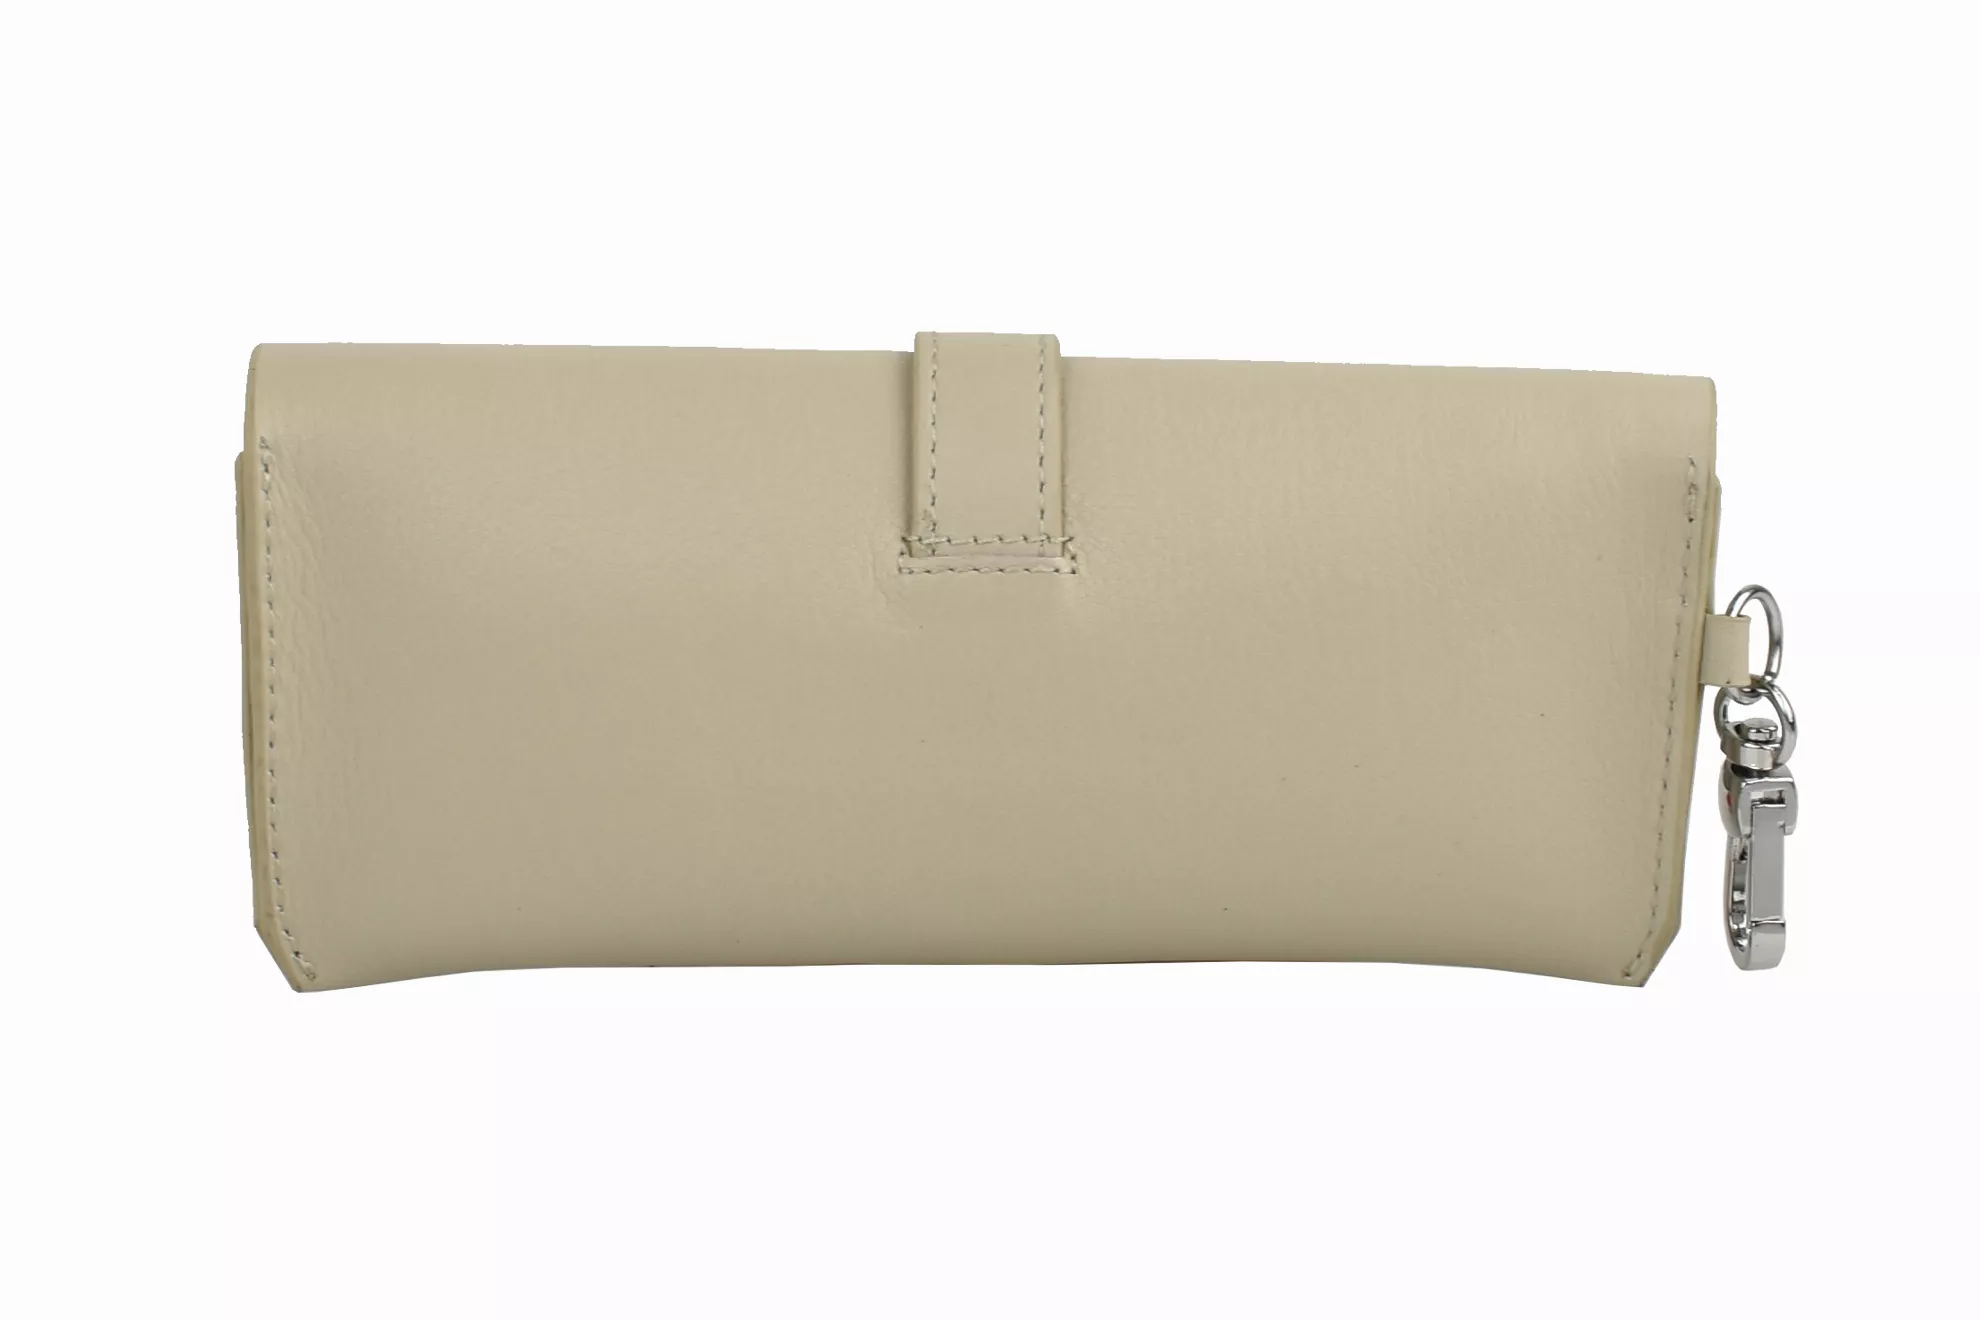 ROMY Suncover / Glases Case, creme